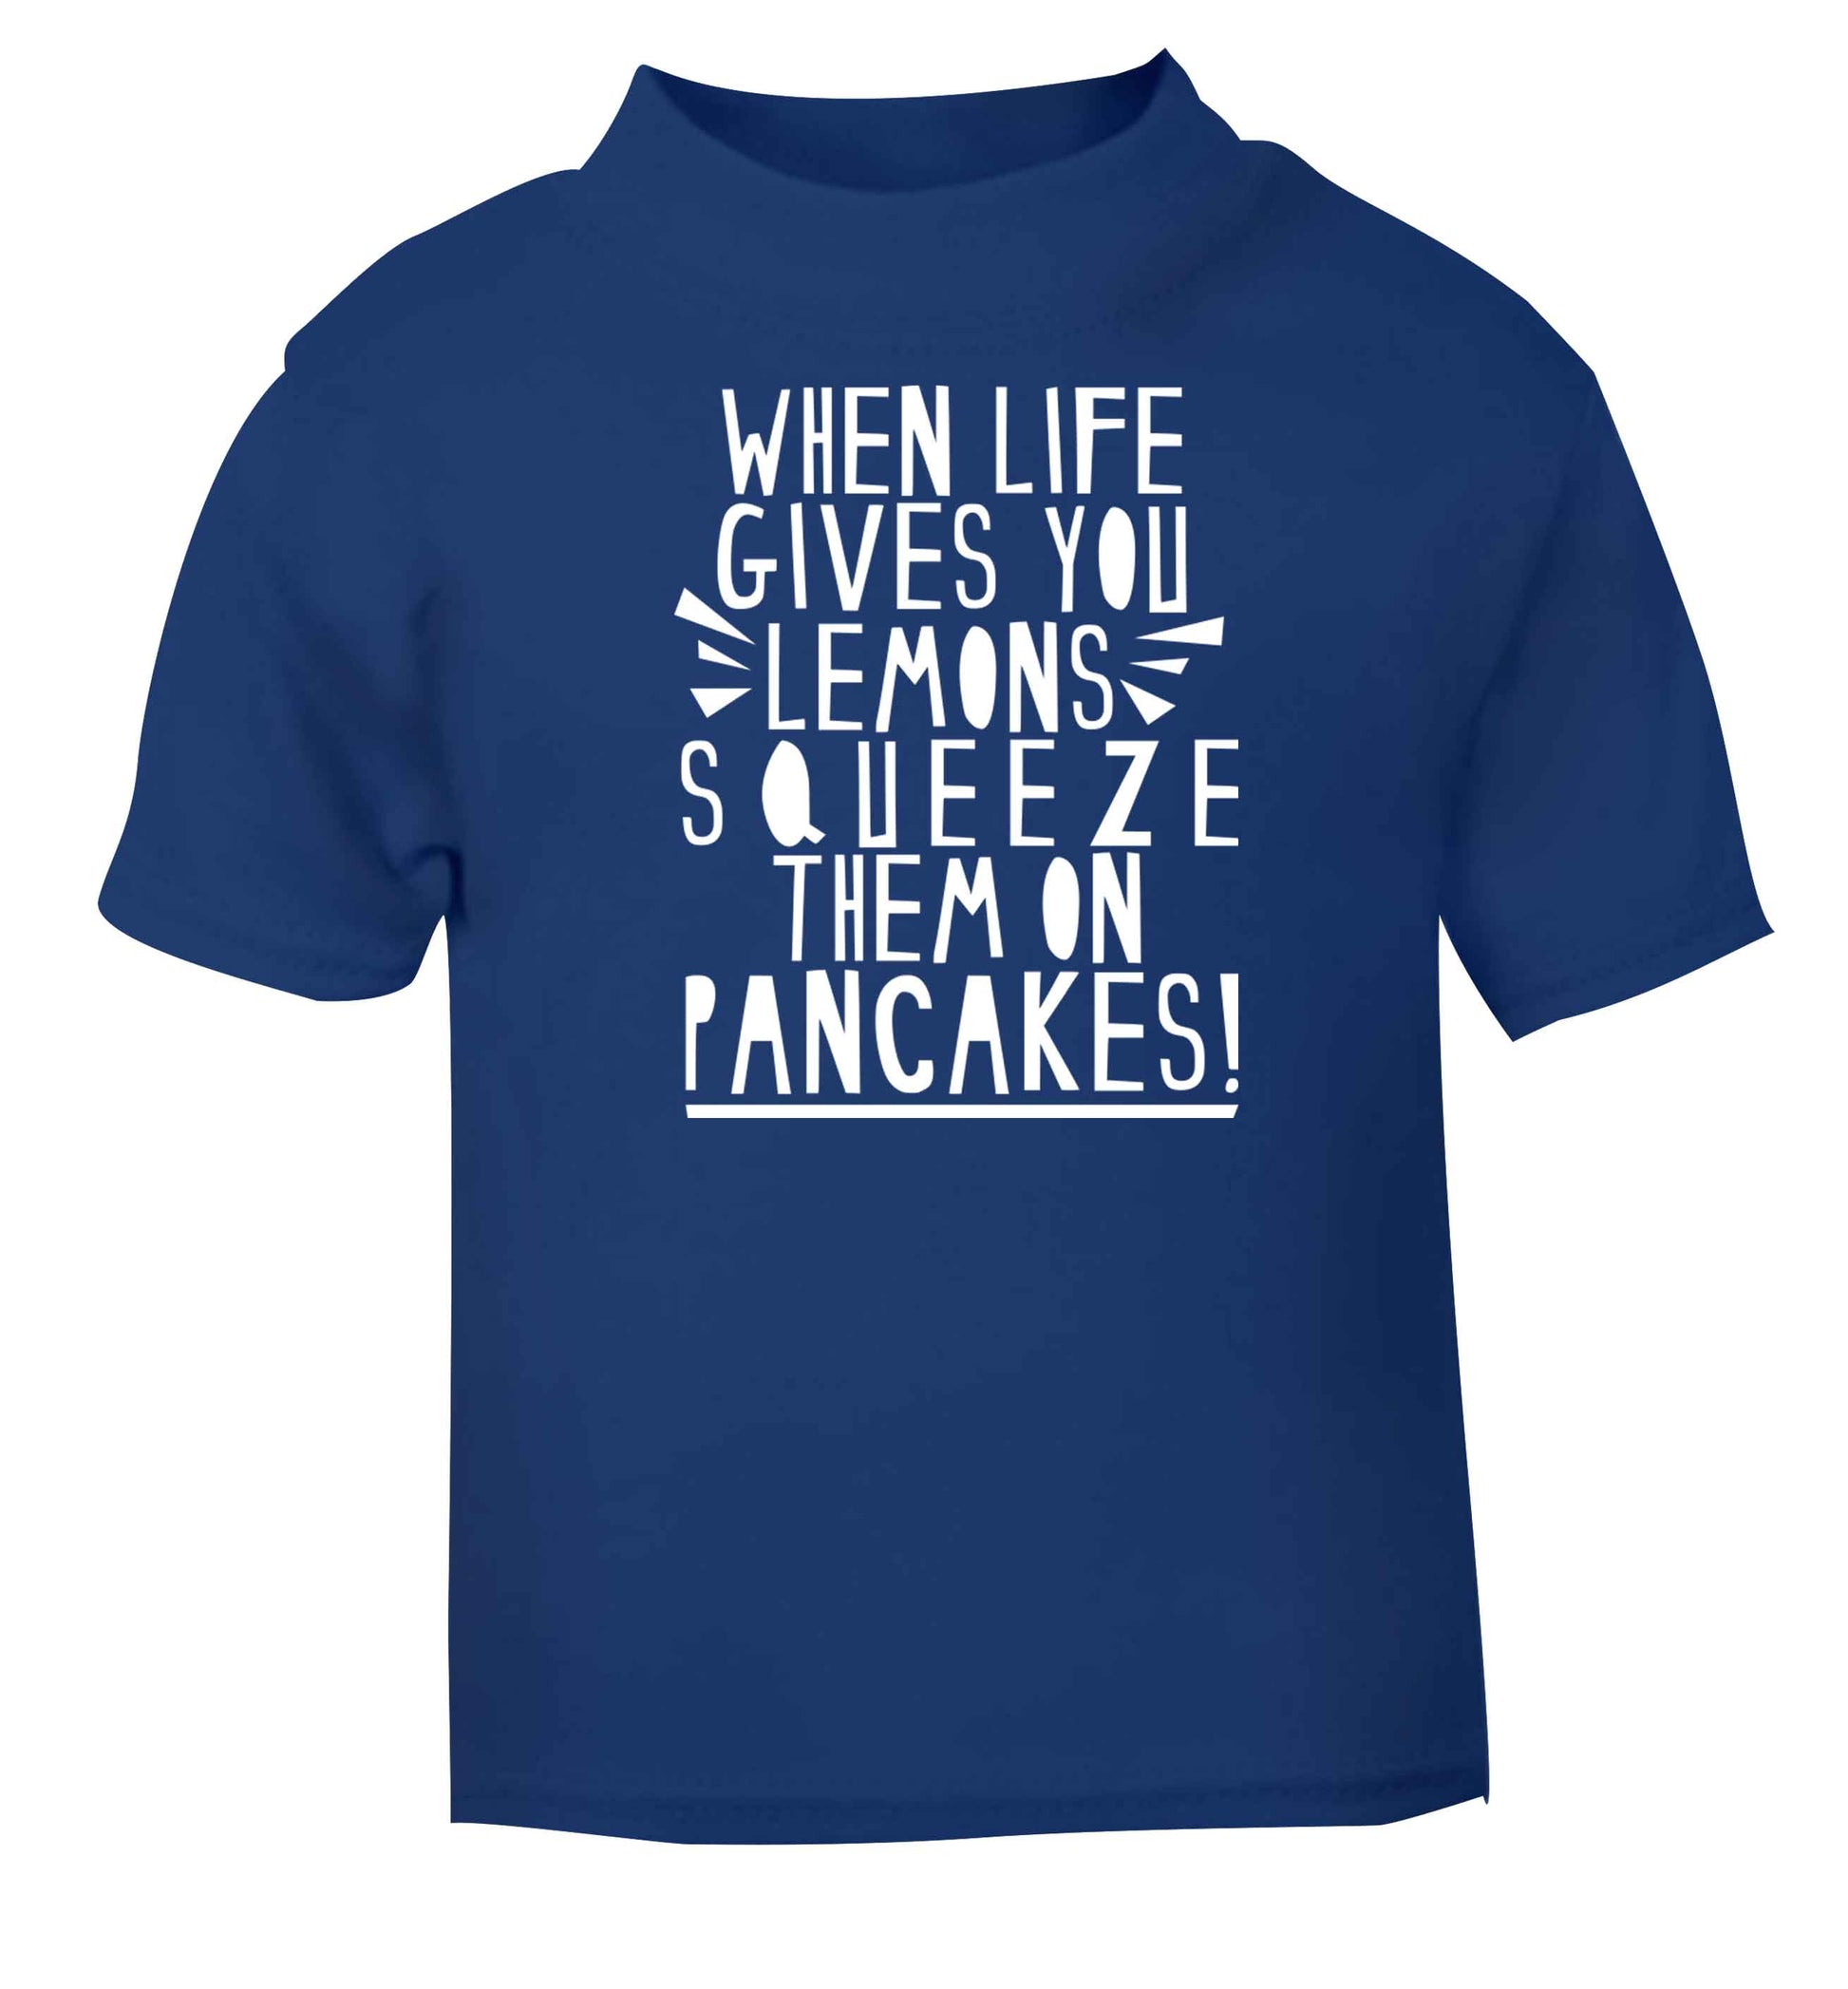 When life gives you lemons squeeze them on pancakes! blue baby toddler Tshirt 2 Years